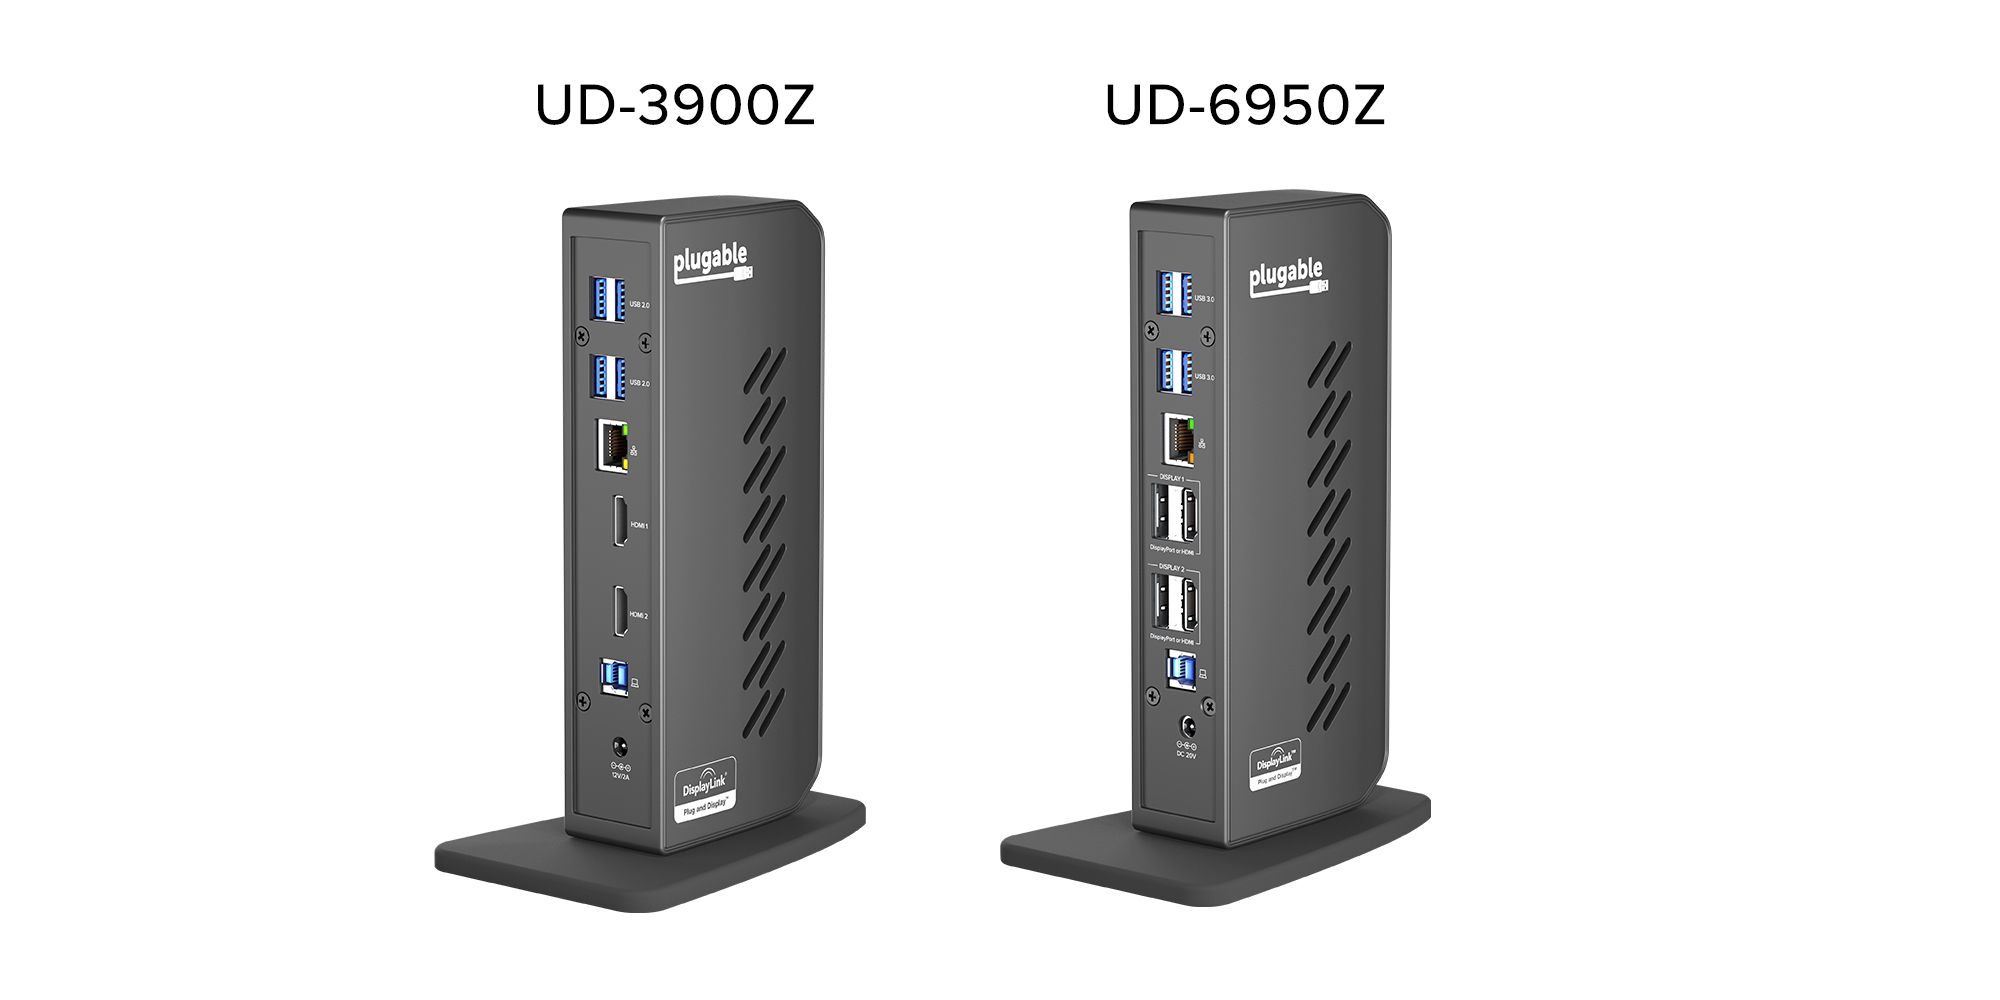 Plugable UD-3900Z and UD-6950Z docks